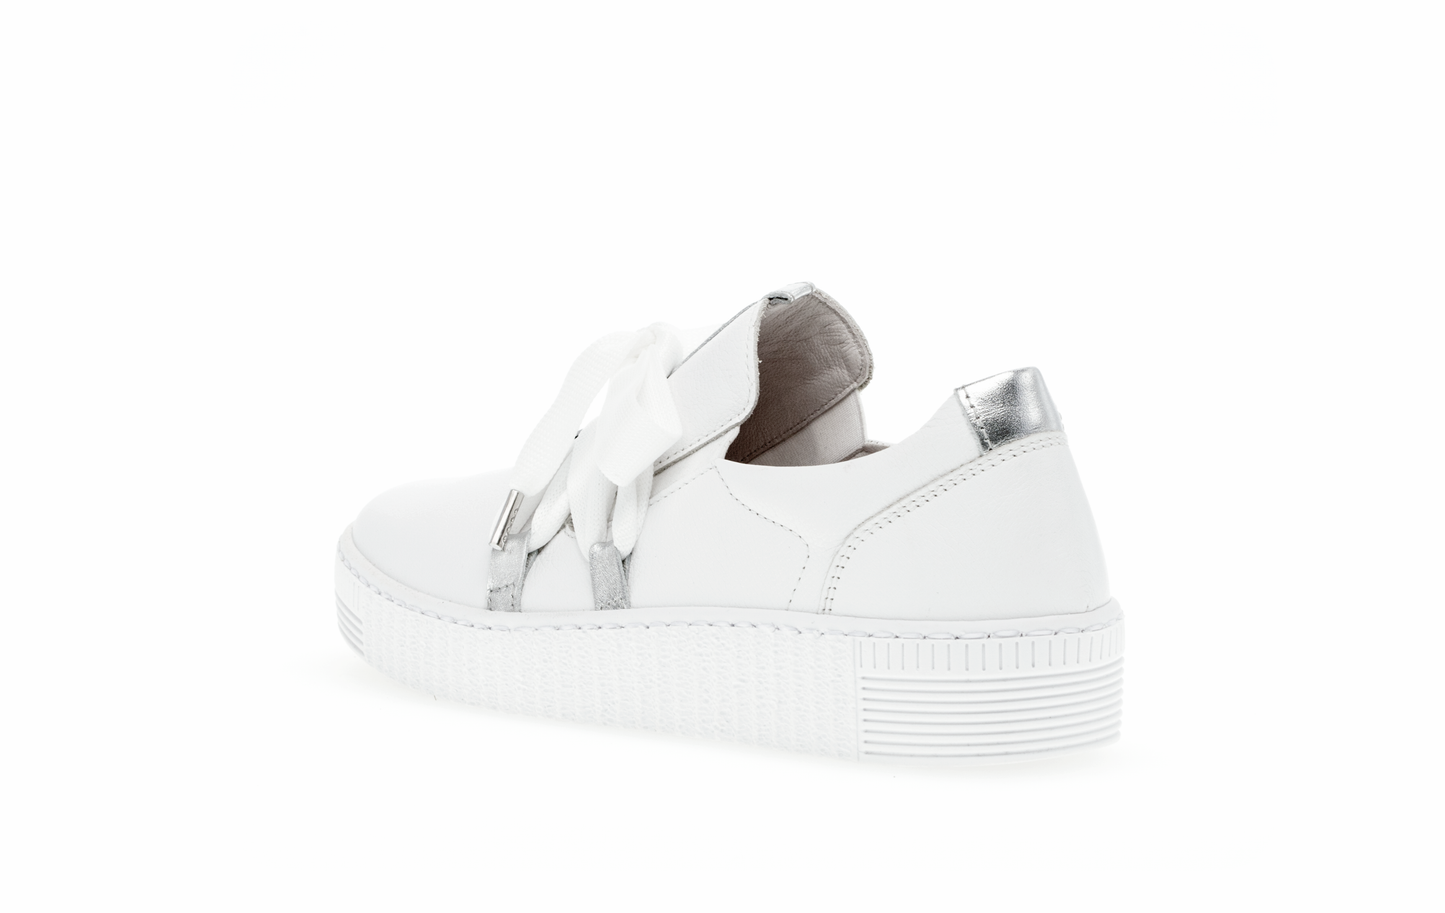 Gabor 03.333.21 White & Silver Elastic Trainers